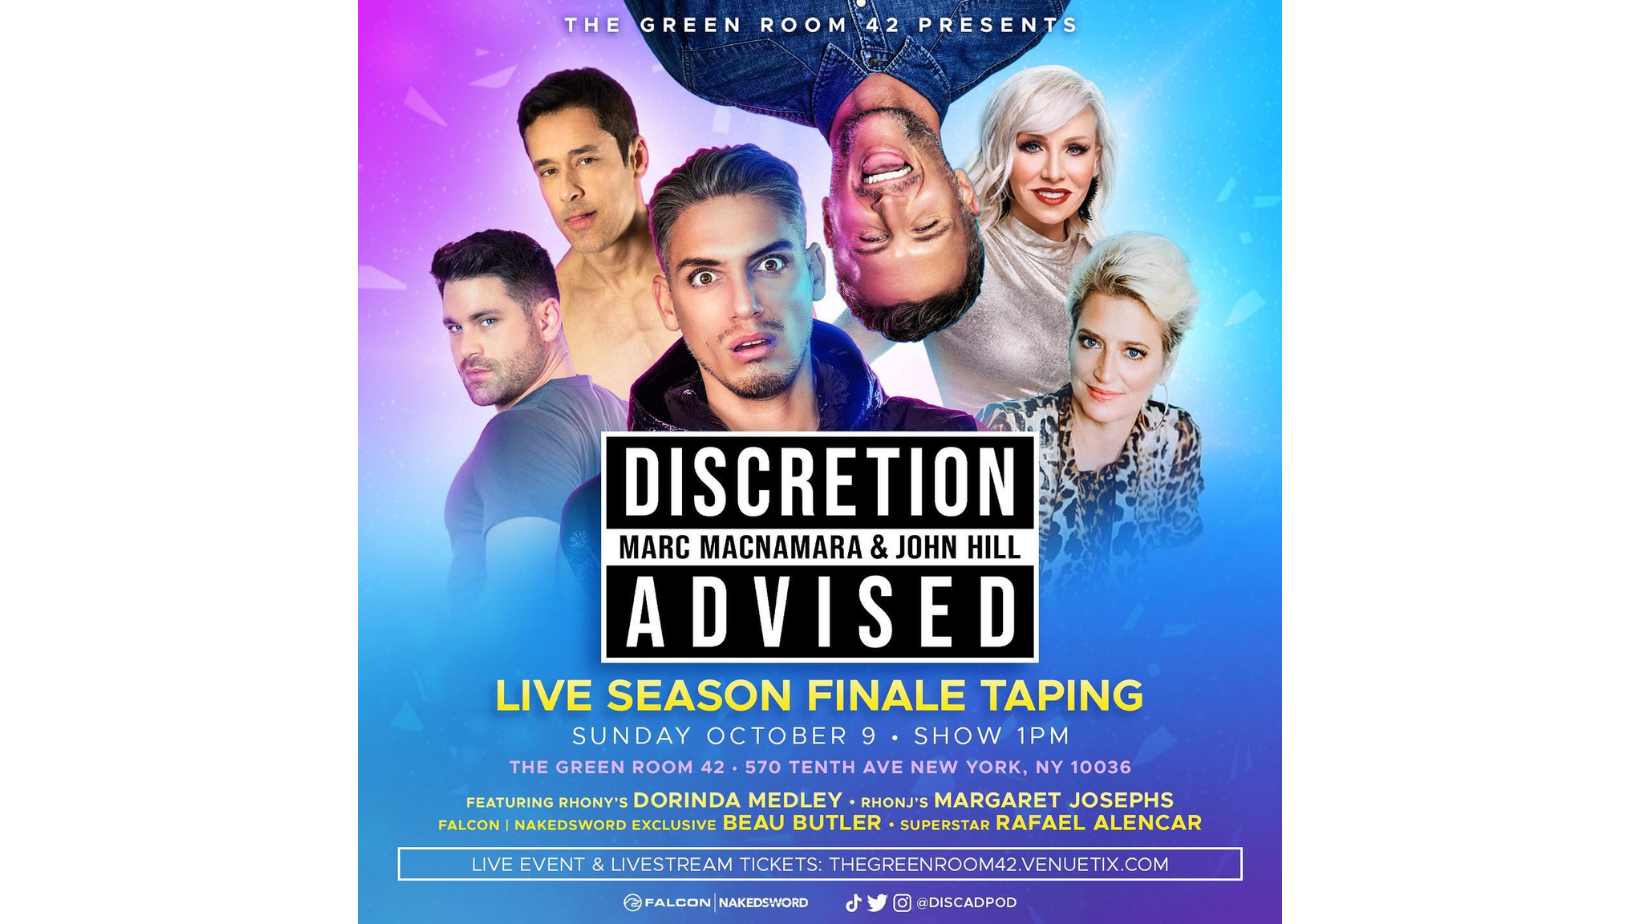 Discretion Advised Podcast Live: Are You Going?